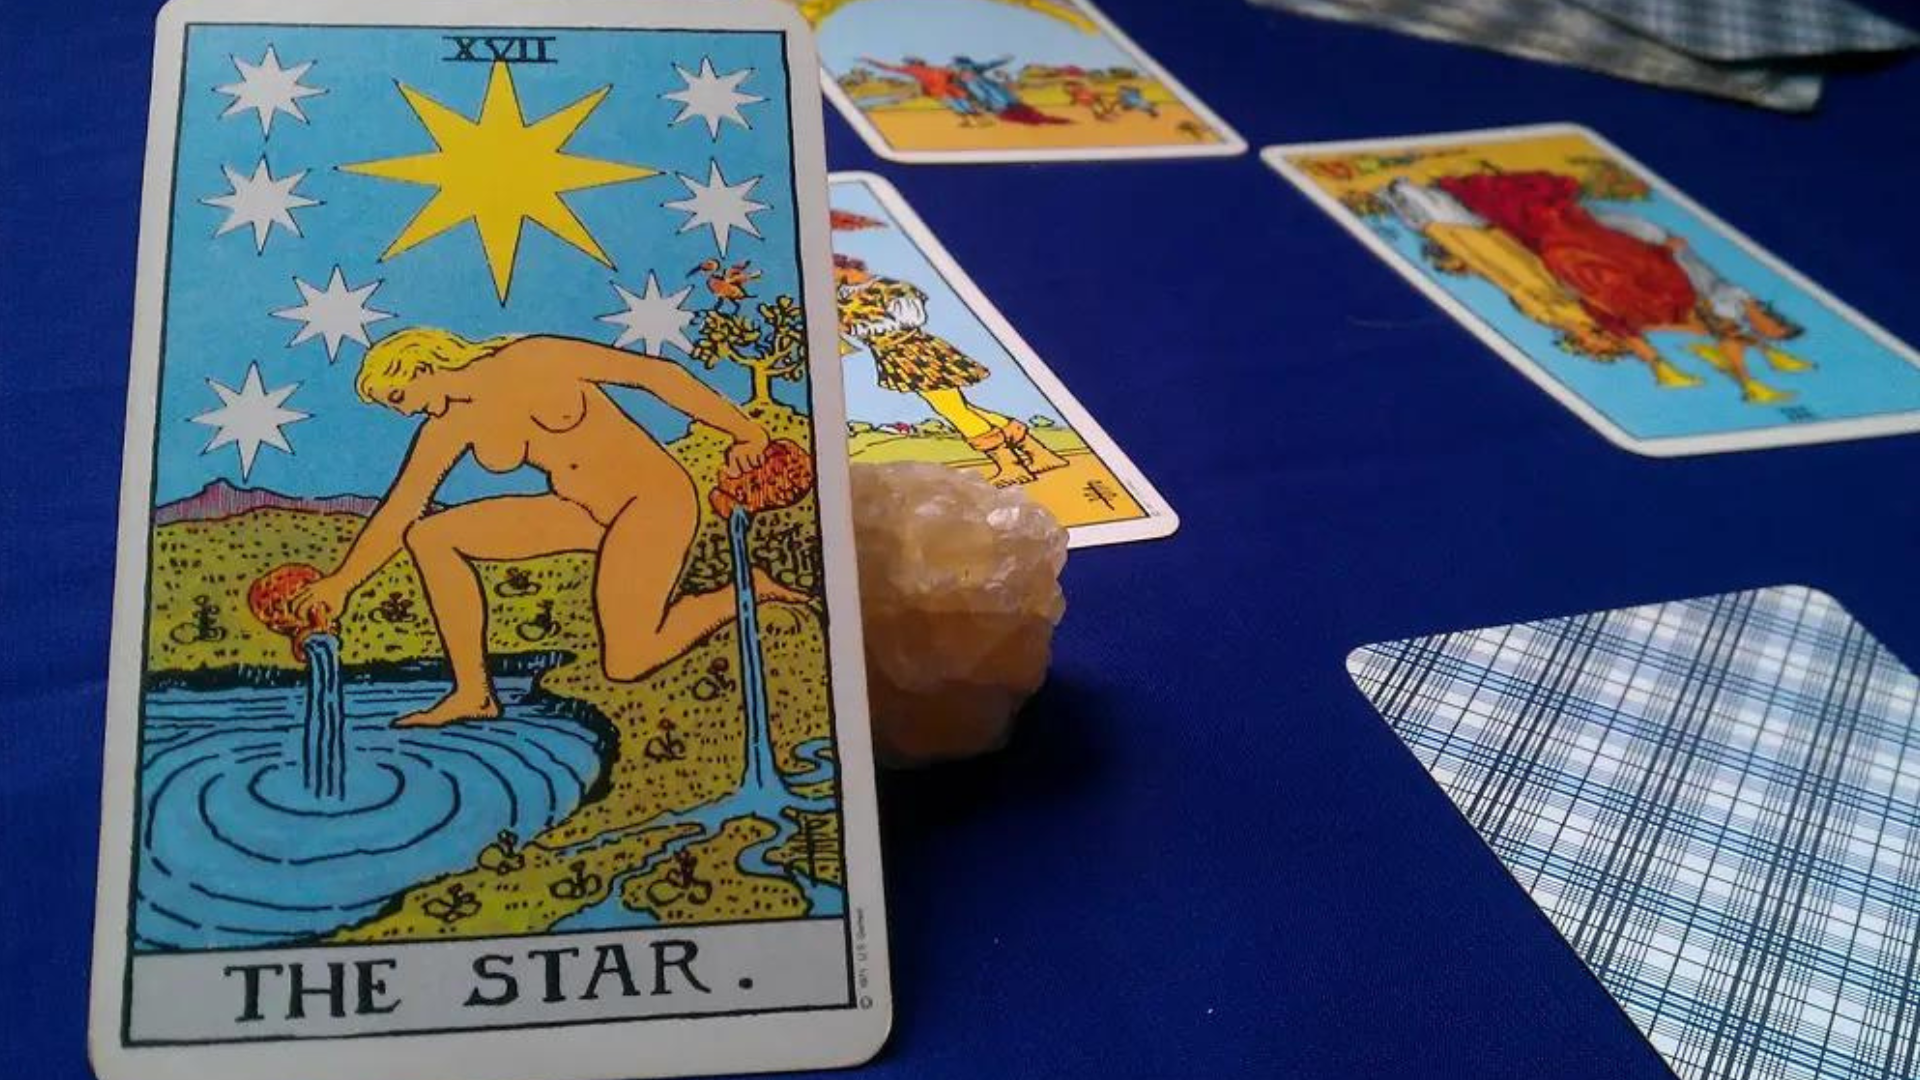 The Star Upright Card placed on a blue table along with other cards and a crystal